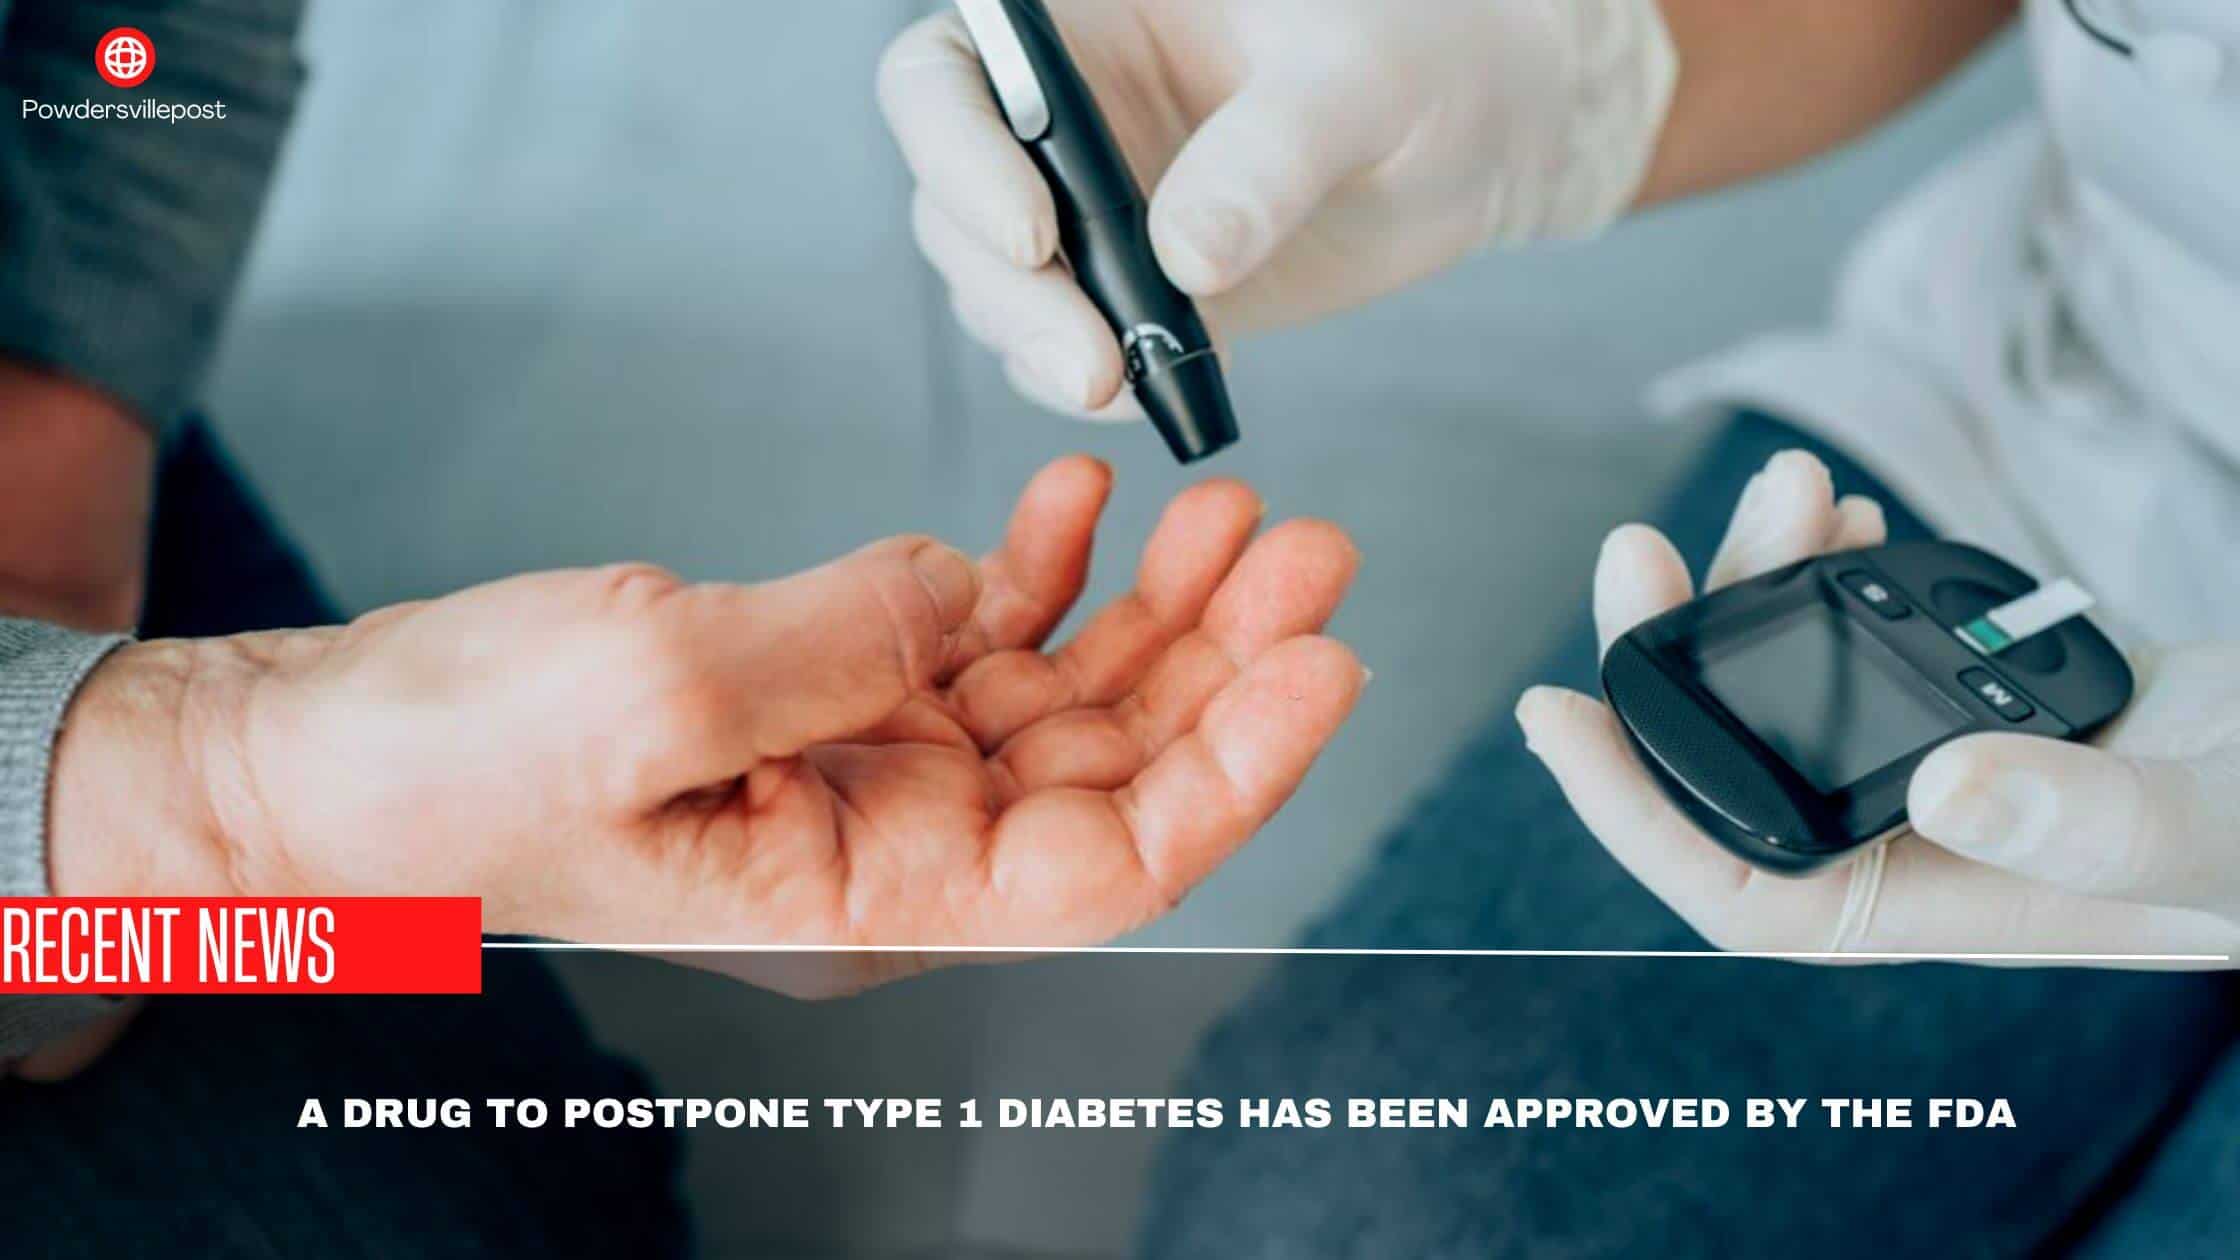 A Drug To Postpone Type 1 Diabetes Has Been Approved By The FDA